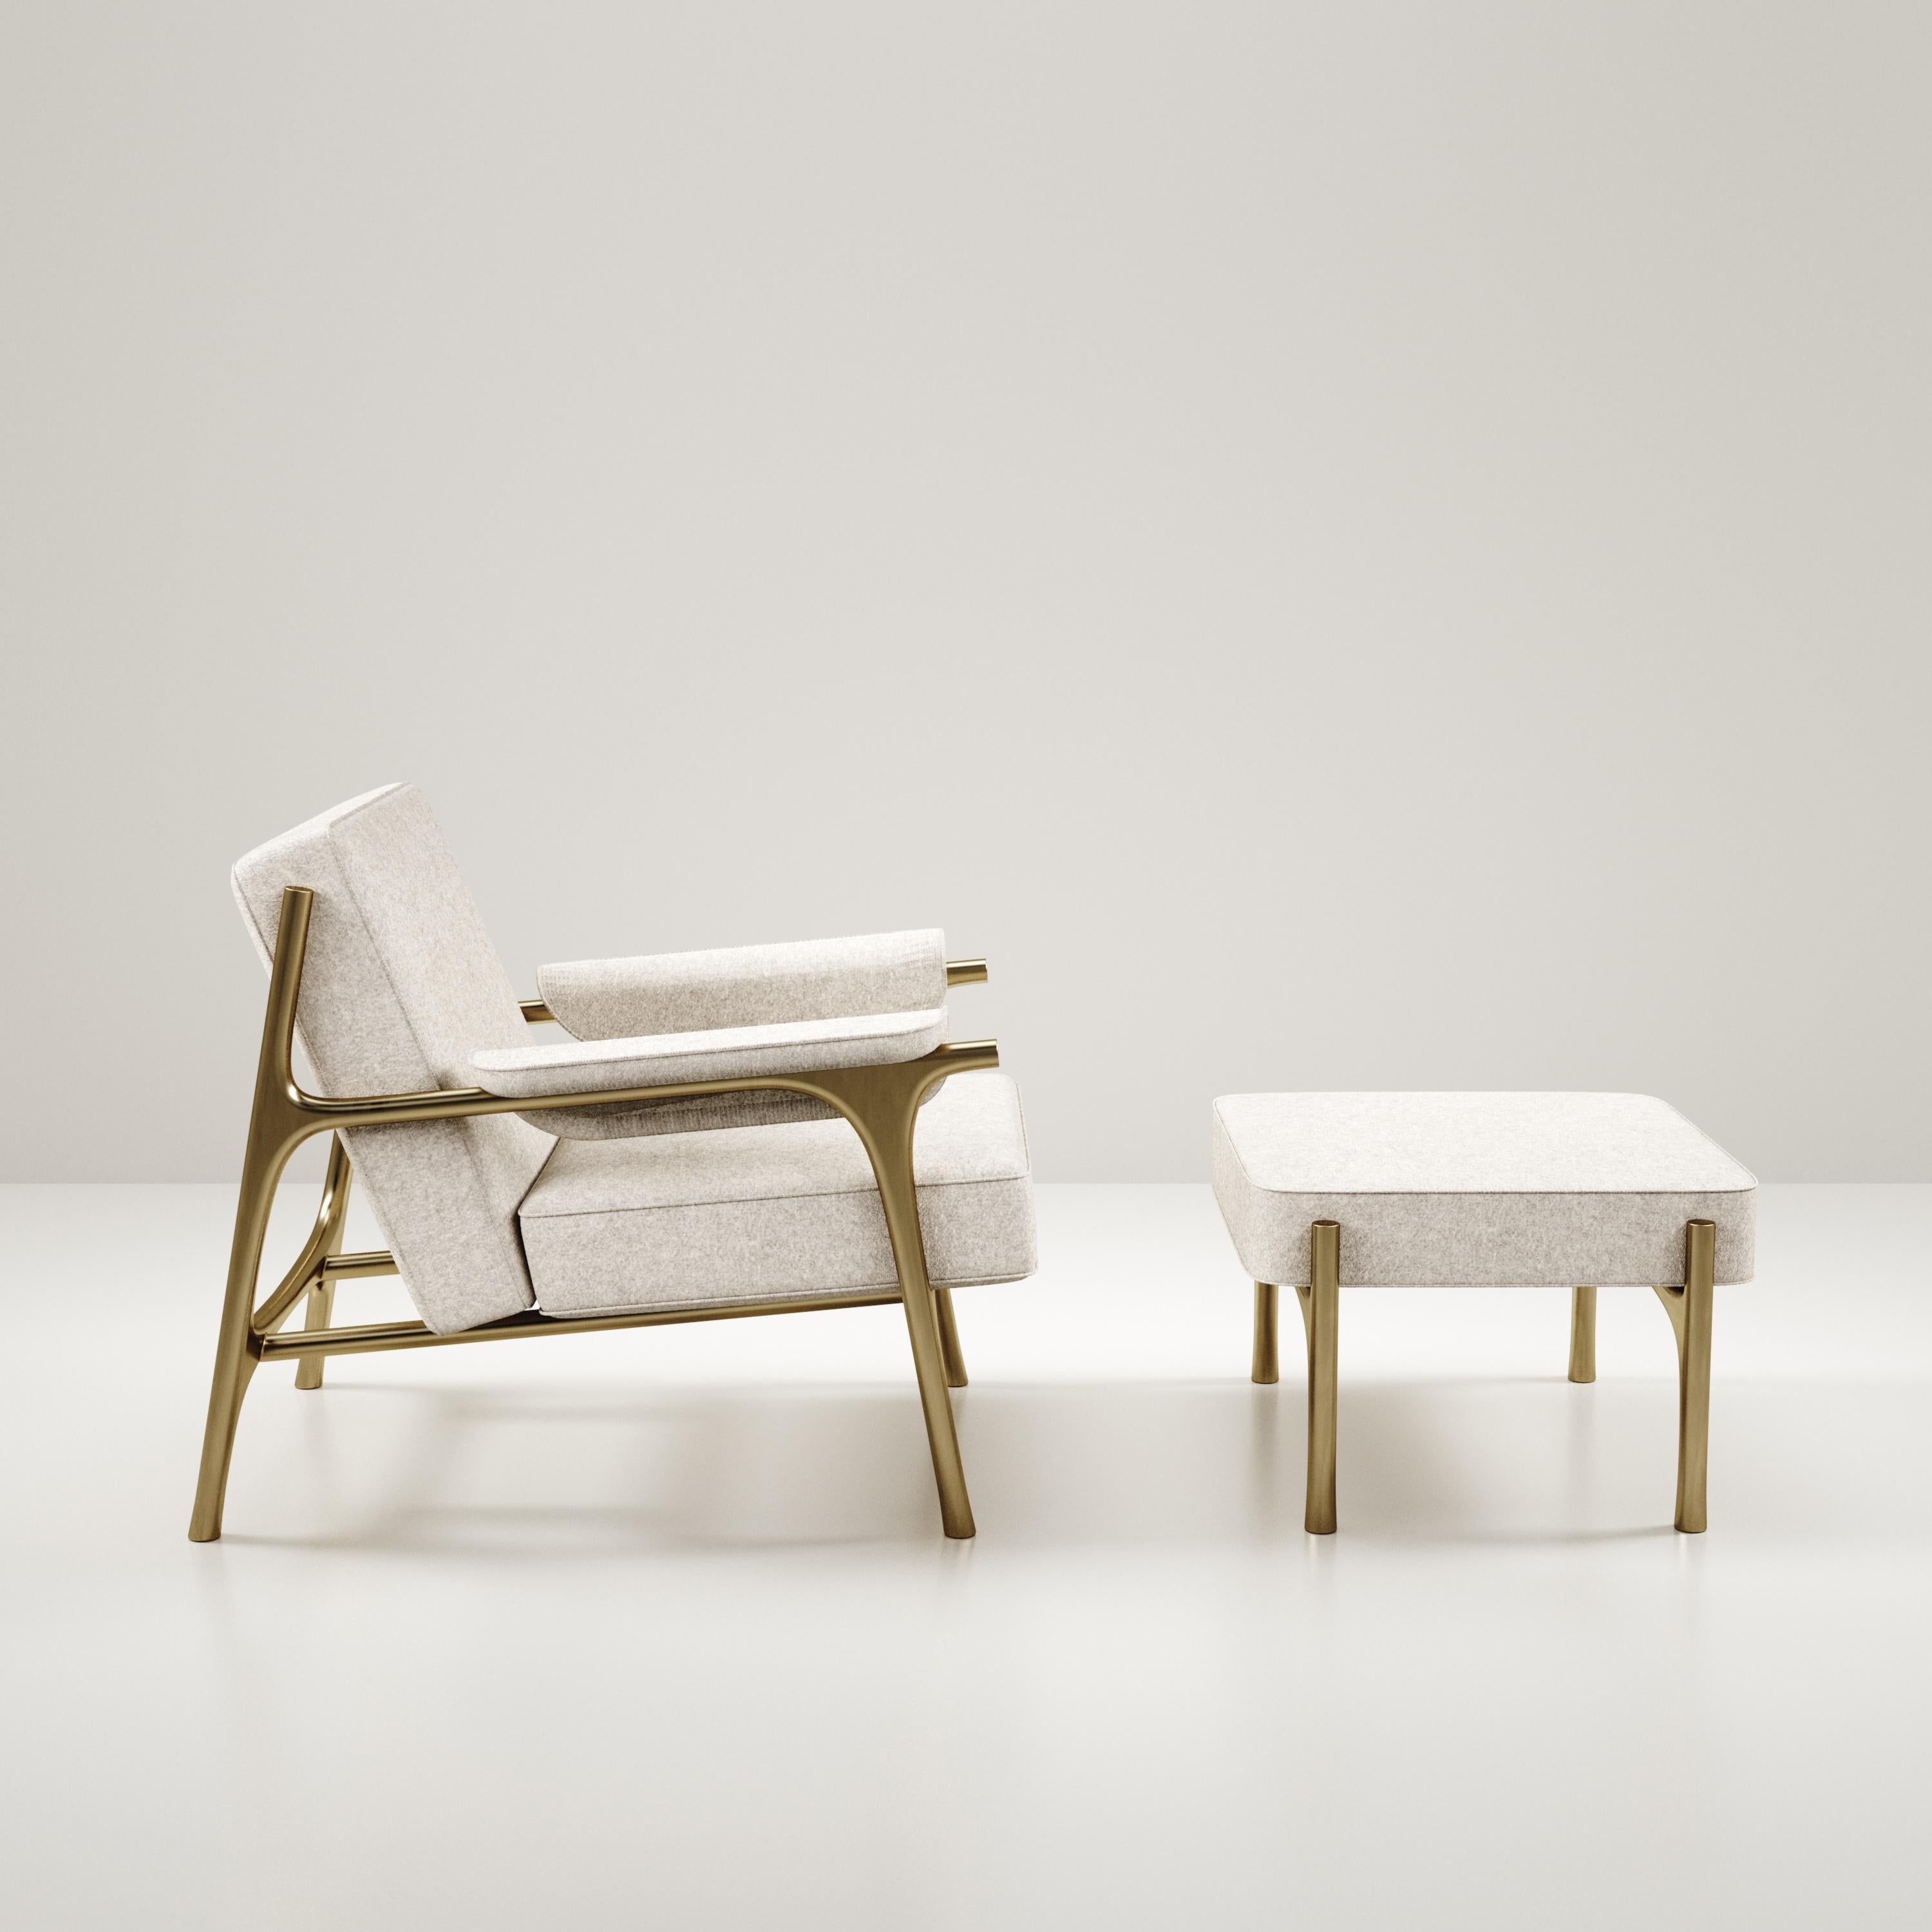 The Ramo armchair & footstool set by R & Y Augousti is an elegant and versatile piece. The upholstered pieces in cream Pierre Frey fabric provide comfort while retaining a unique aesthetic with the bronze-patina brass frame and details. This listing